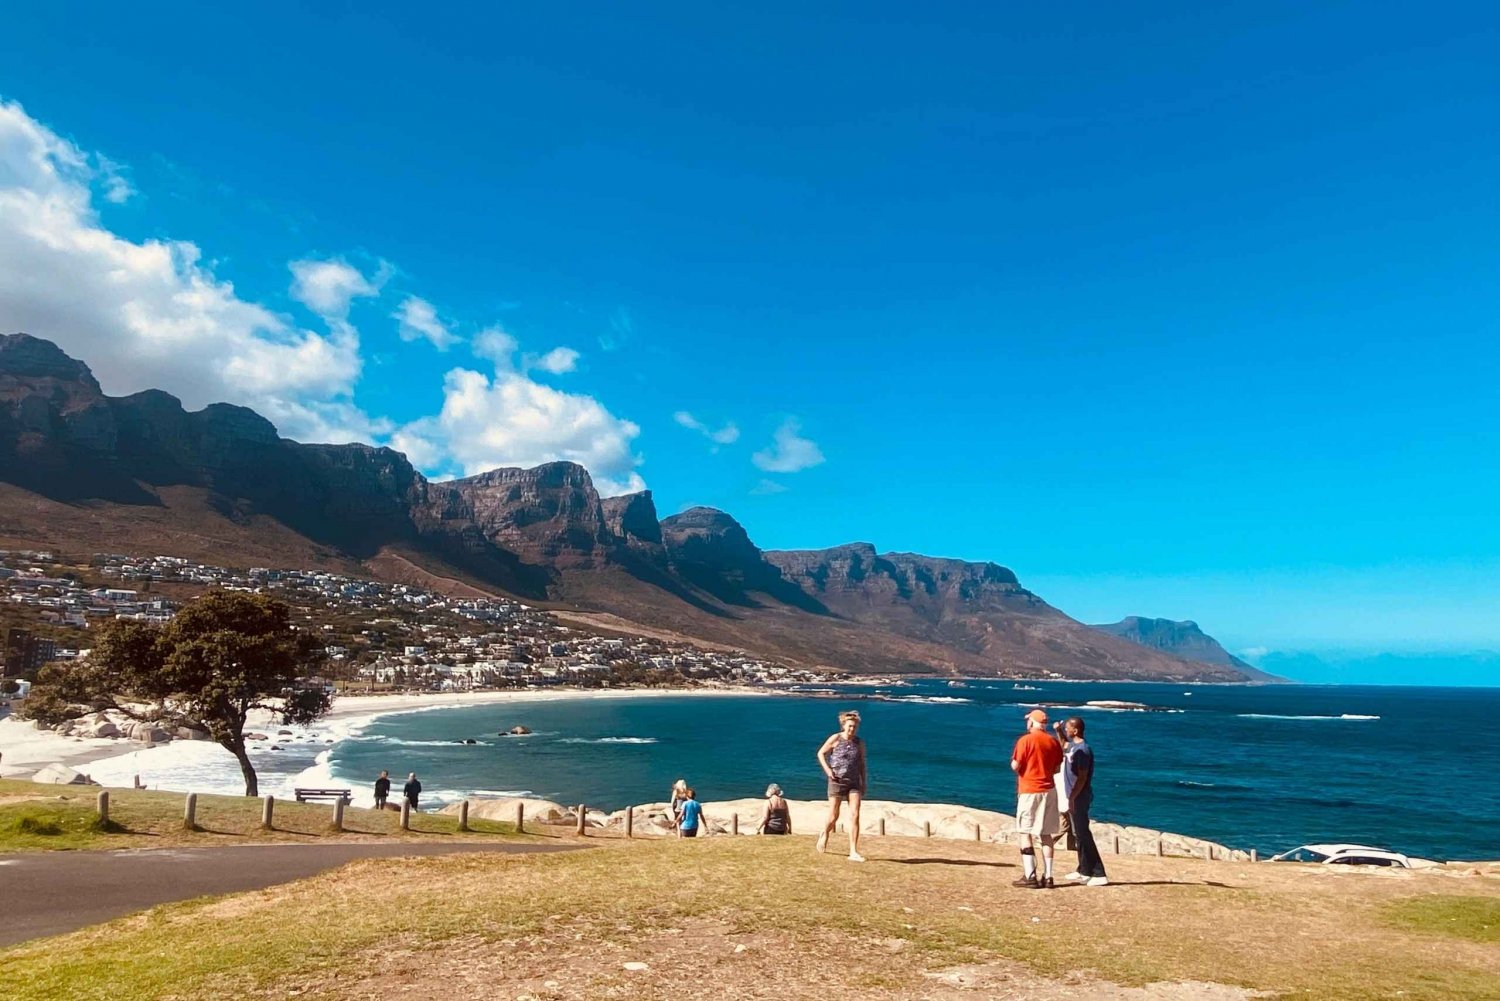 1- Cape Town Tours & Transfers:We guide you around Cape Town